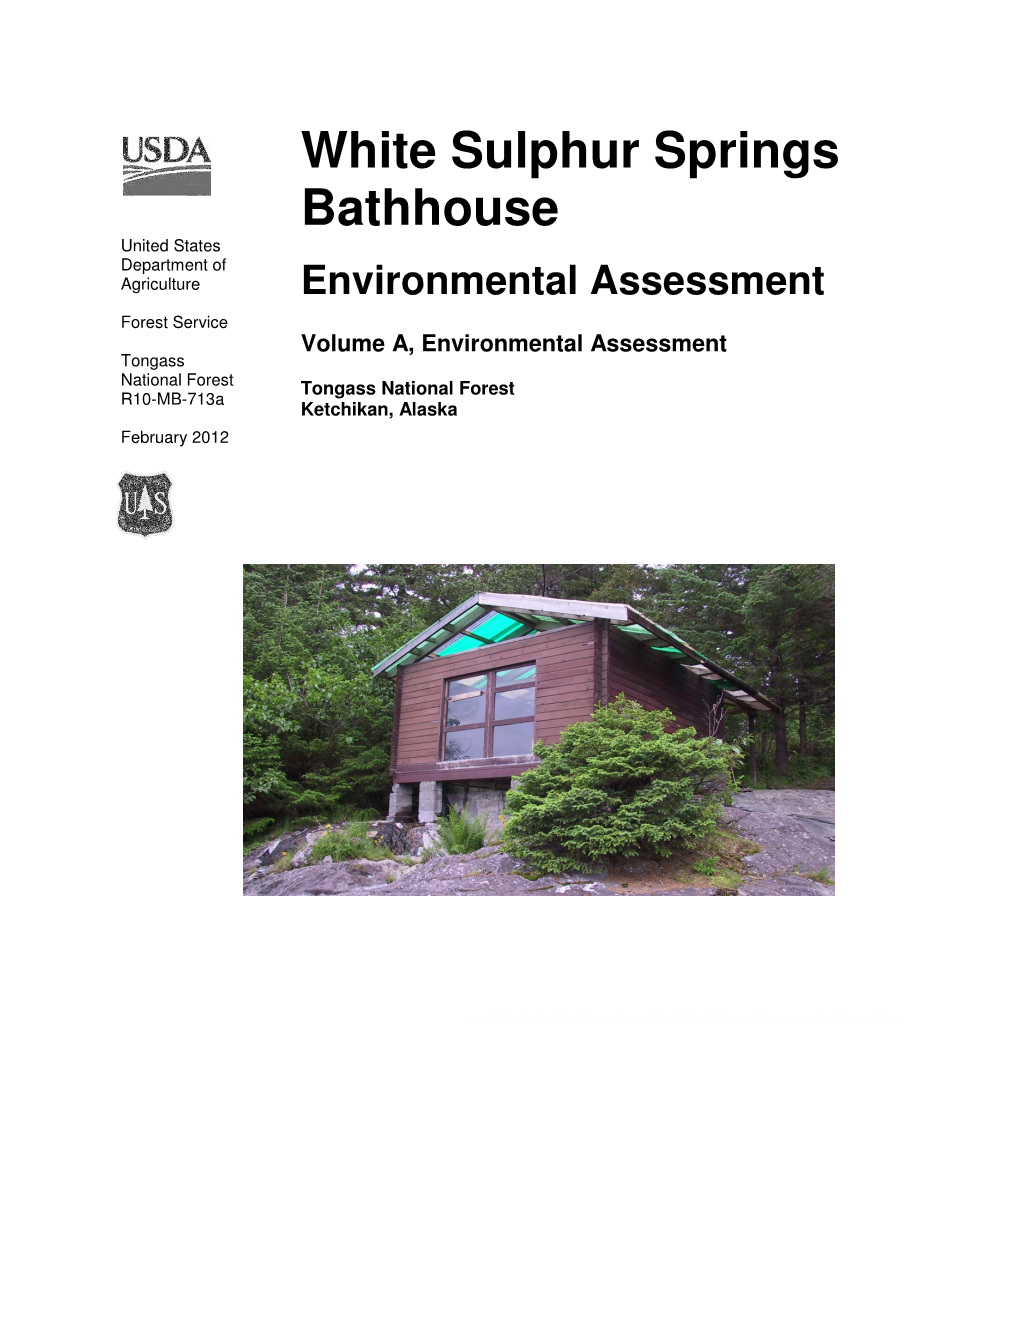 White Sulphur Springs Bathhouse Environmental Assessment - Key Acronyms and Other Terms